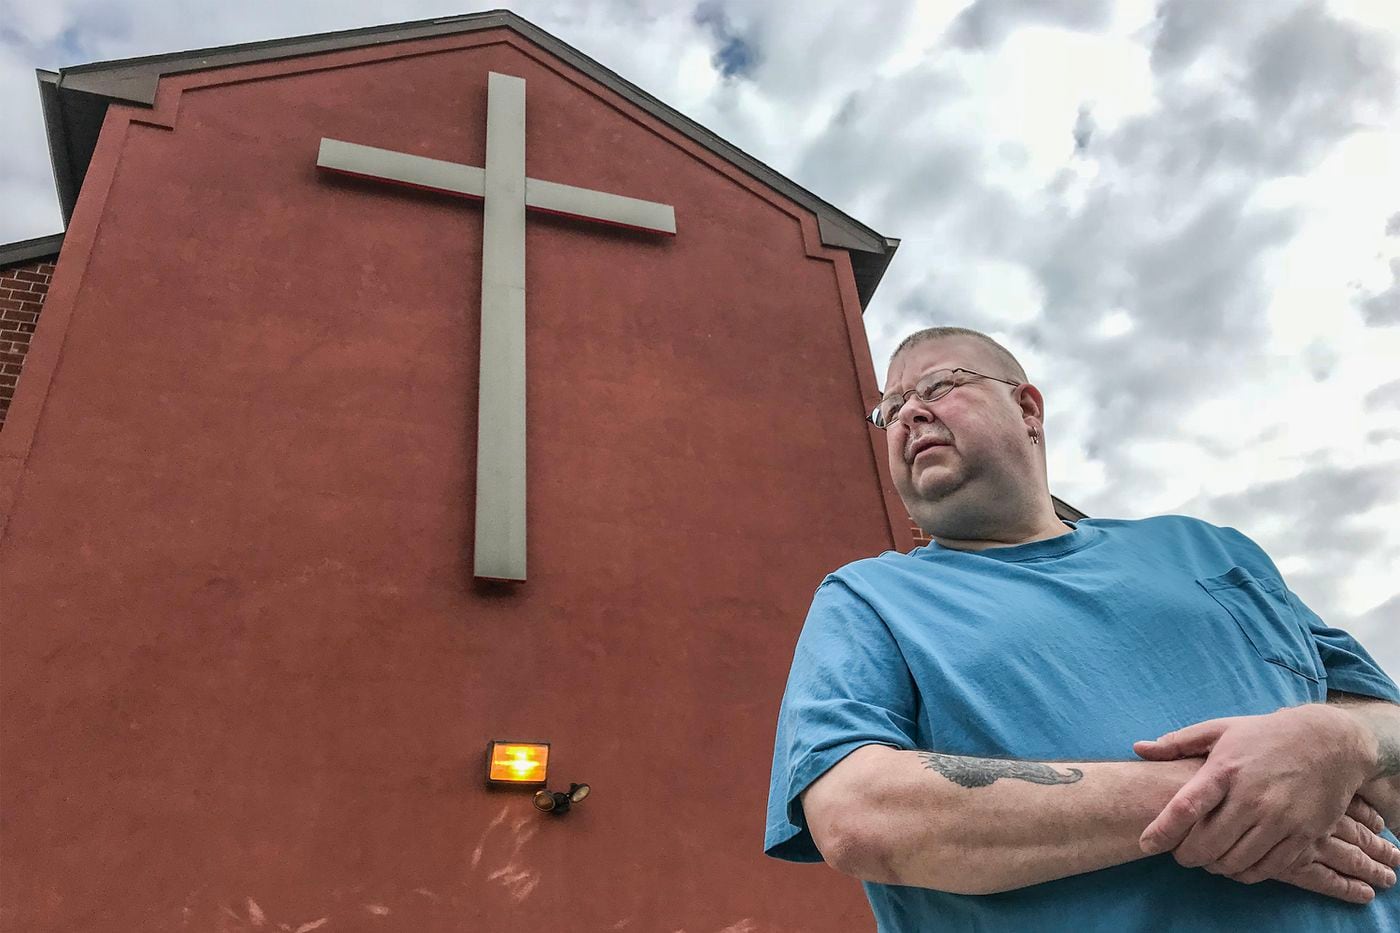 Former Jersey Klansman found forgiveness and an unlikely friend in a black church